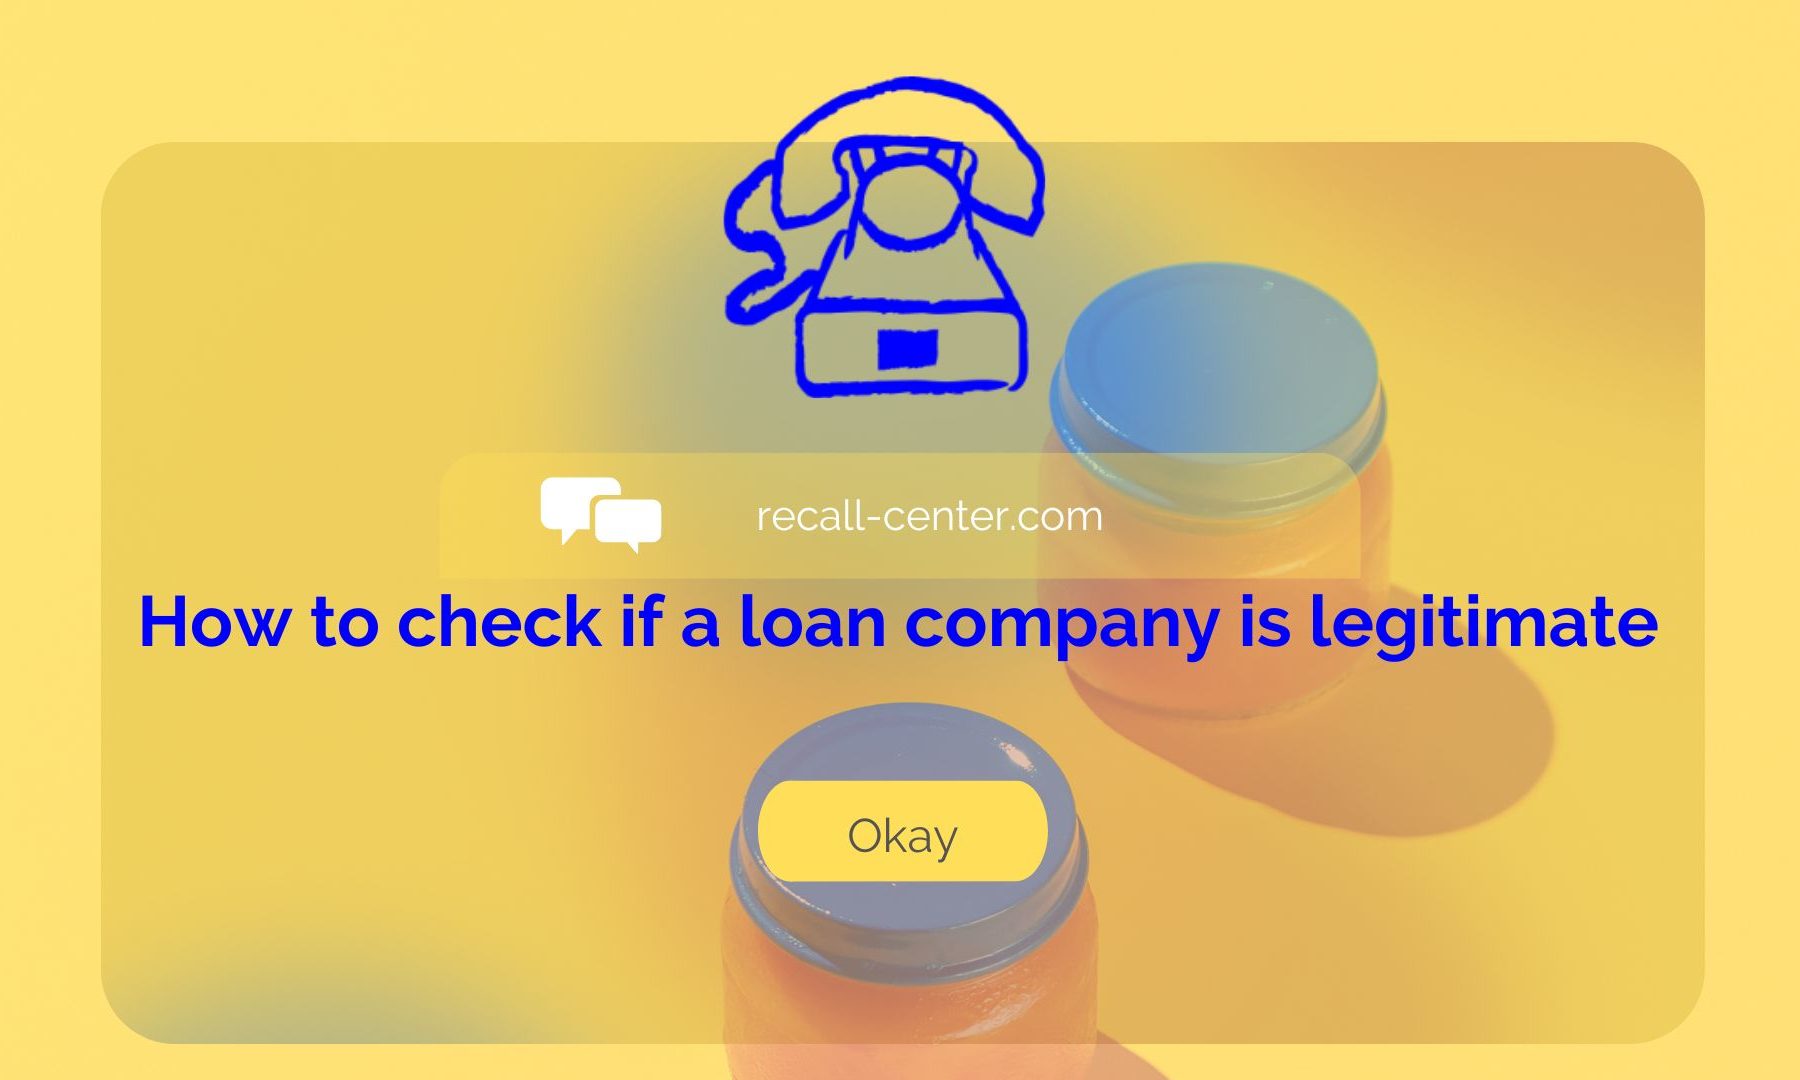 How to check if a loan company is legitimate